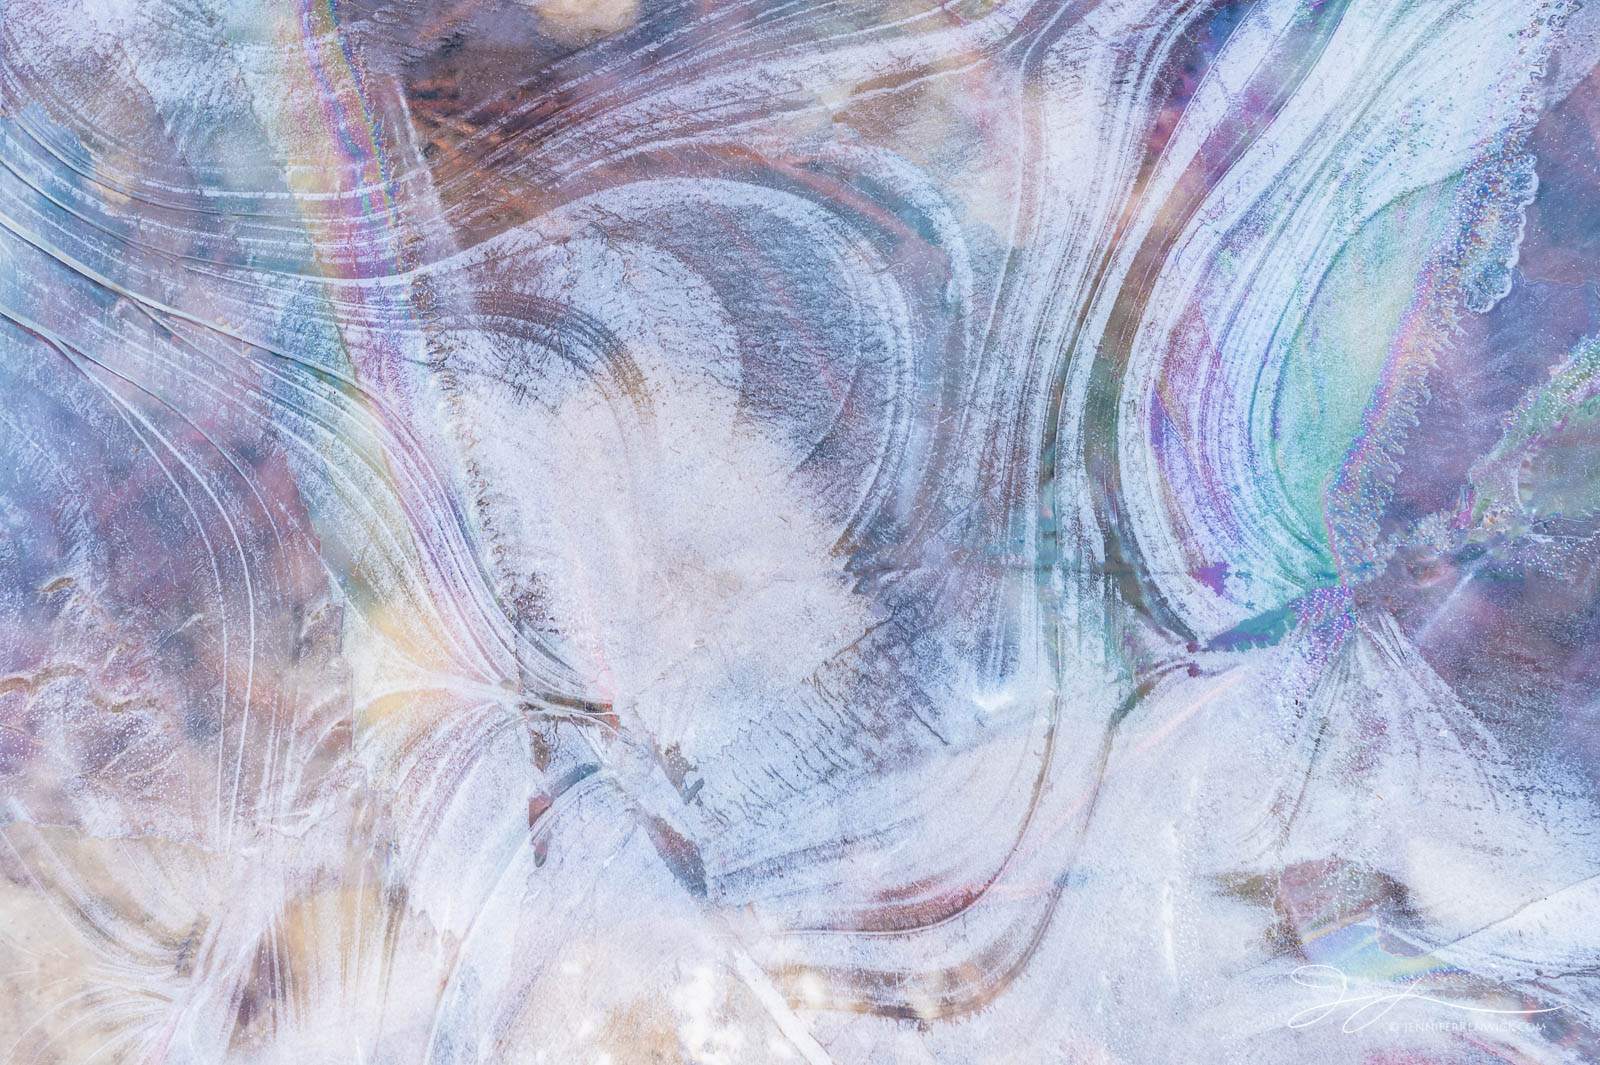 A patch of ice composed of refracted colors and lines resembles scribbles.